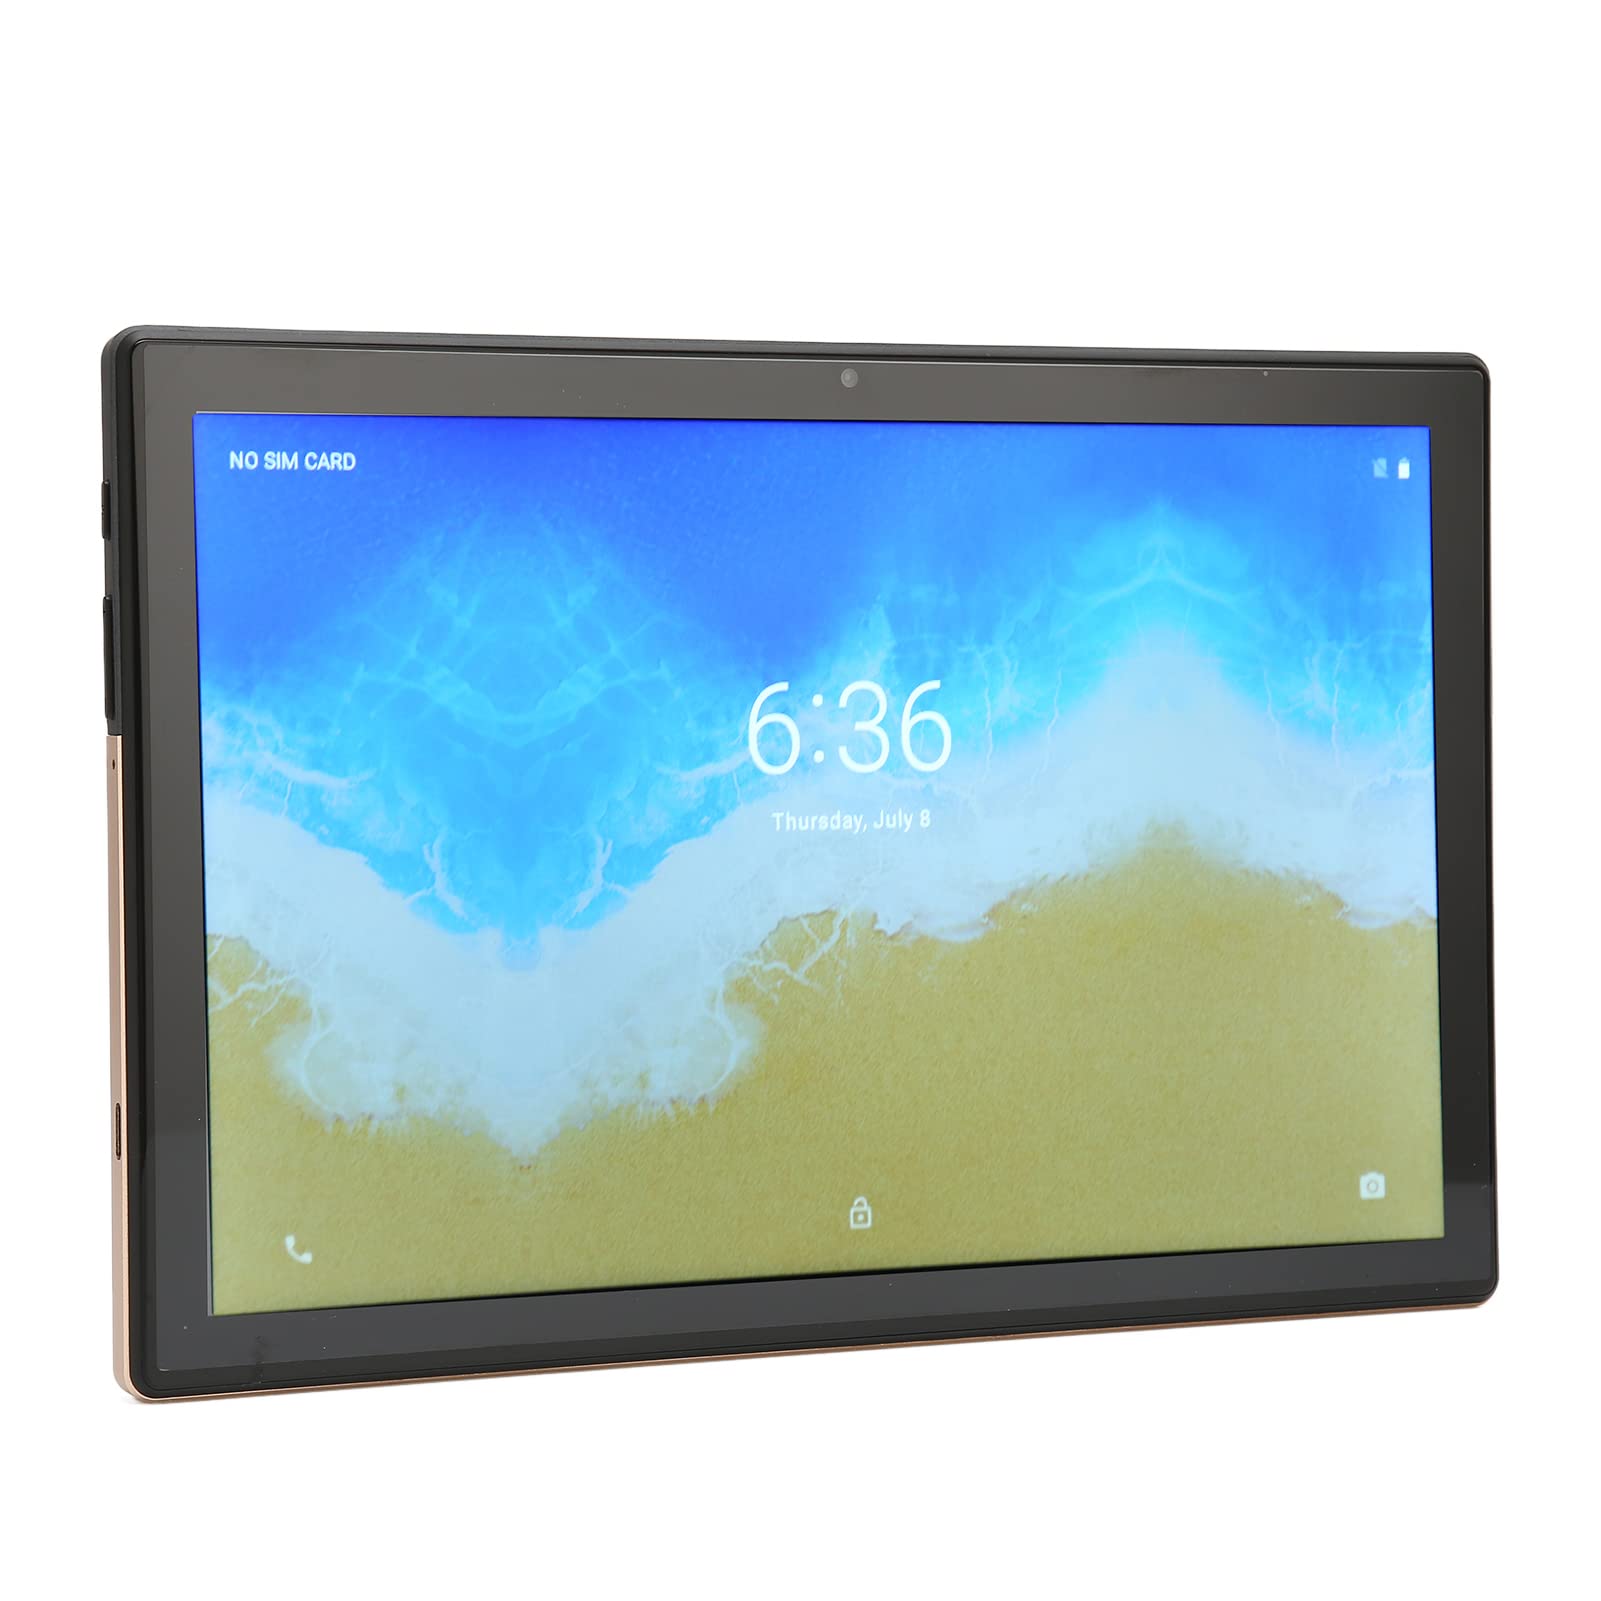 MAVIS LAVEN Tablet PC, Dual Band Tablet 2.4G 5G Octa Core Chip for Home for Kids (US Plug)